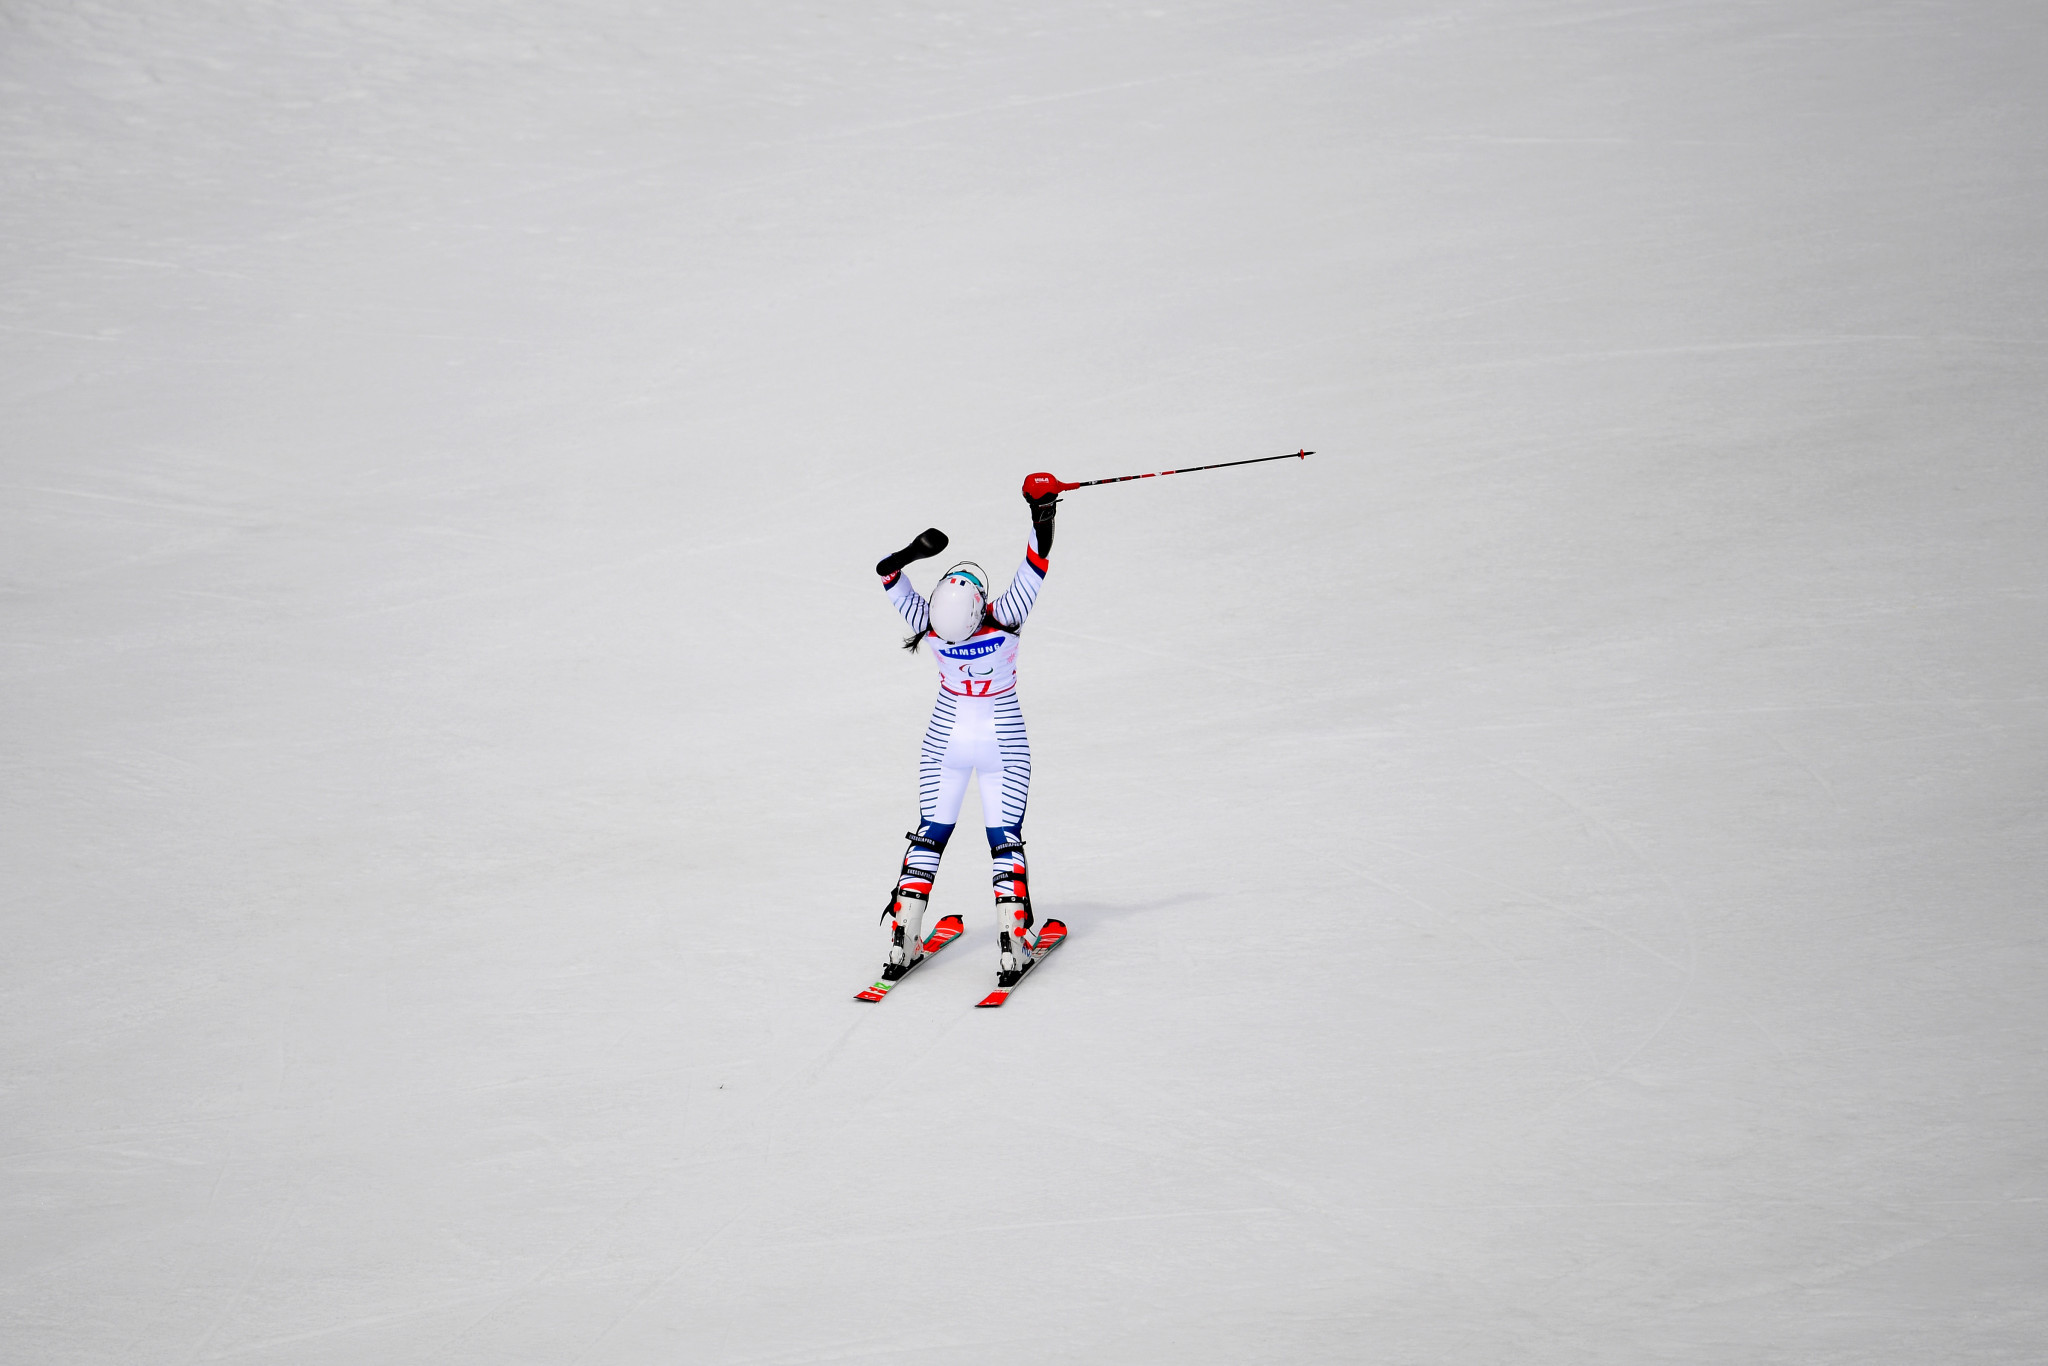 Marie Bochet of France recorded her fourth consecutive victory on the World Cup circuit ©Getty Images